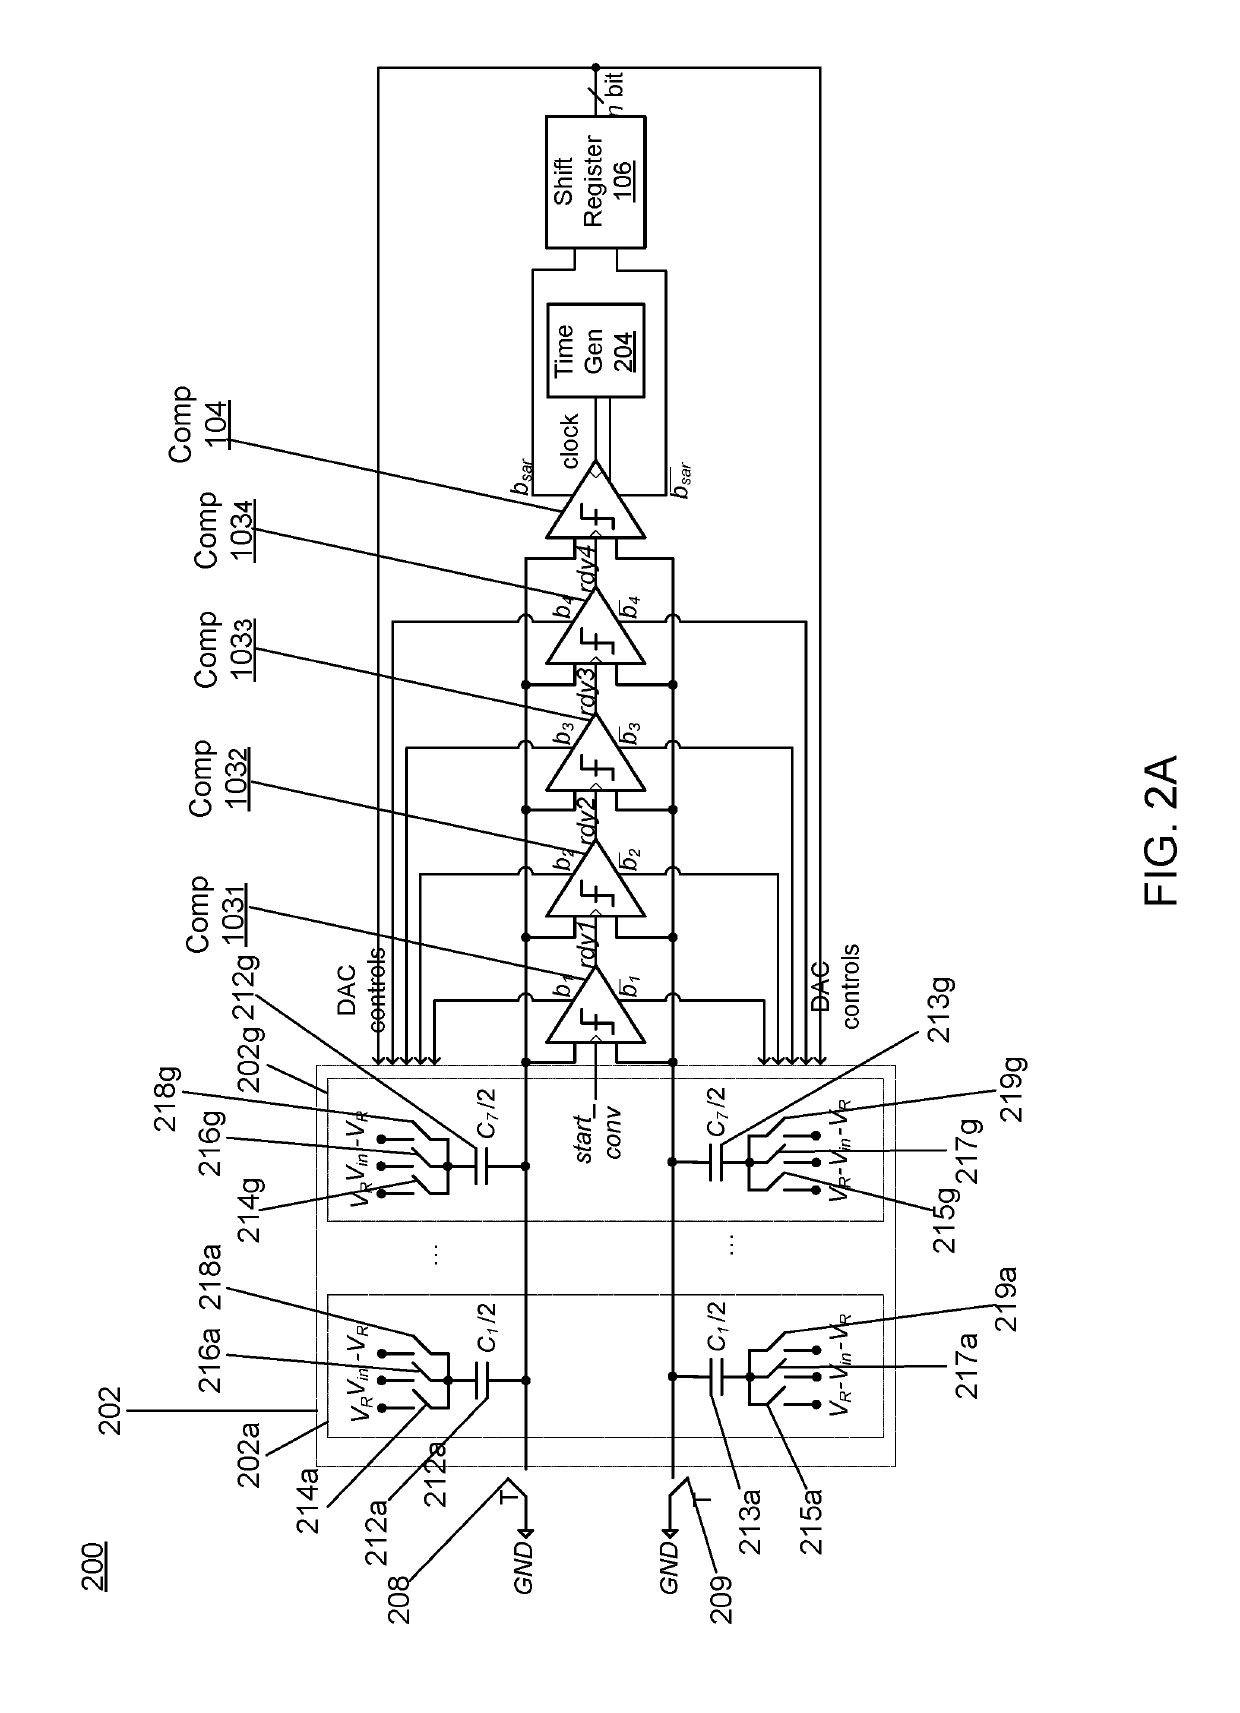 Successive approximation register (SAR) analog to digital converter (ADC) with partial loop-unrolling